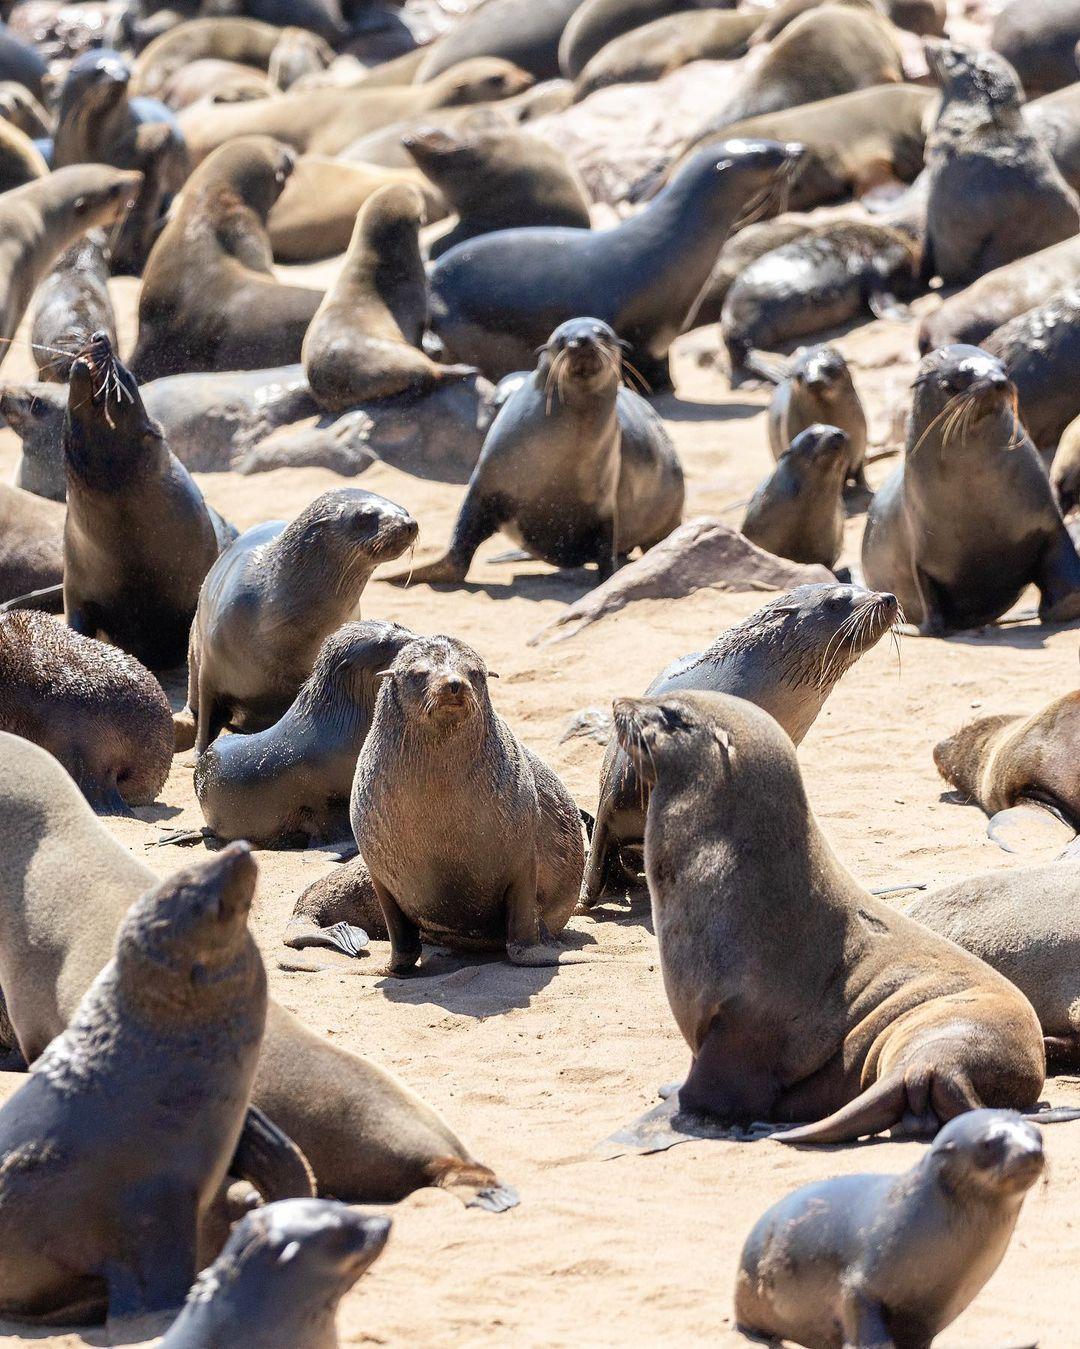 class="content__text"
 Paying a visit to the largest seal colony in the world! Approximately 200.000 wild seals live here 🦭 
 